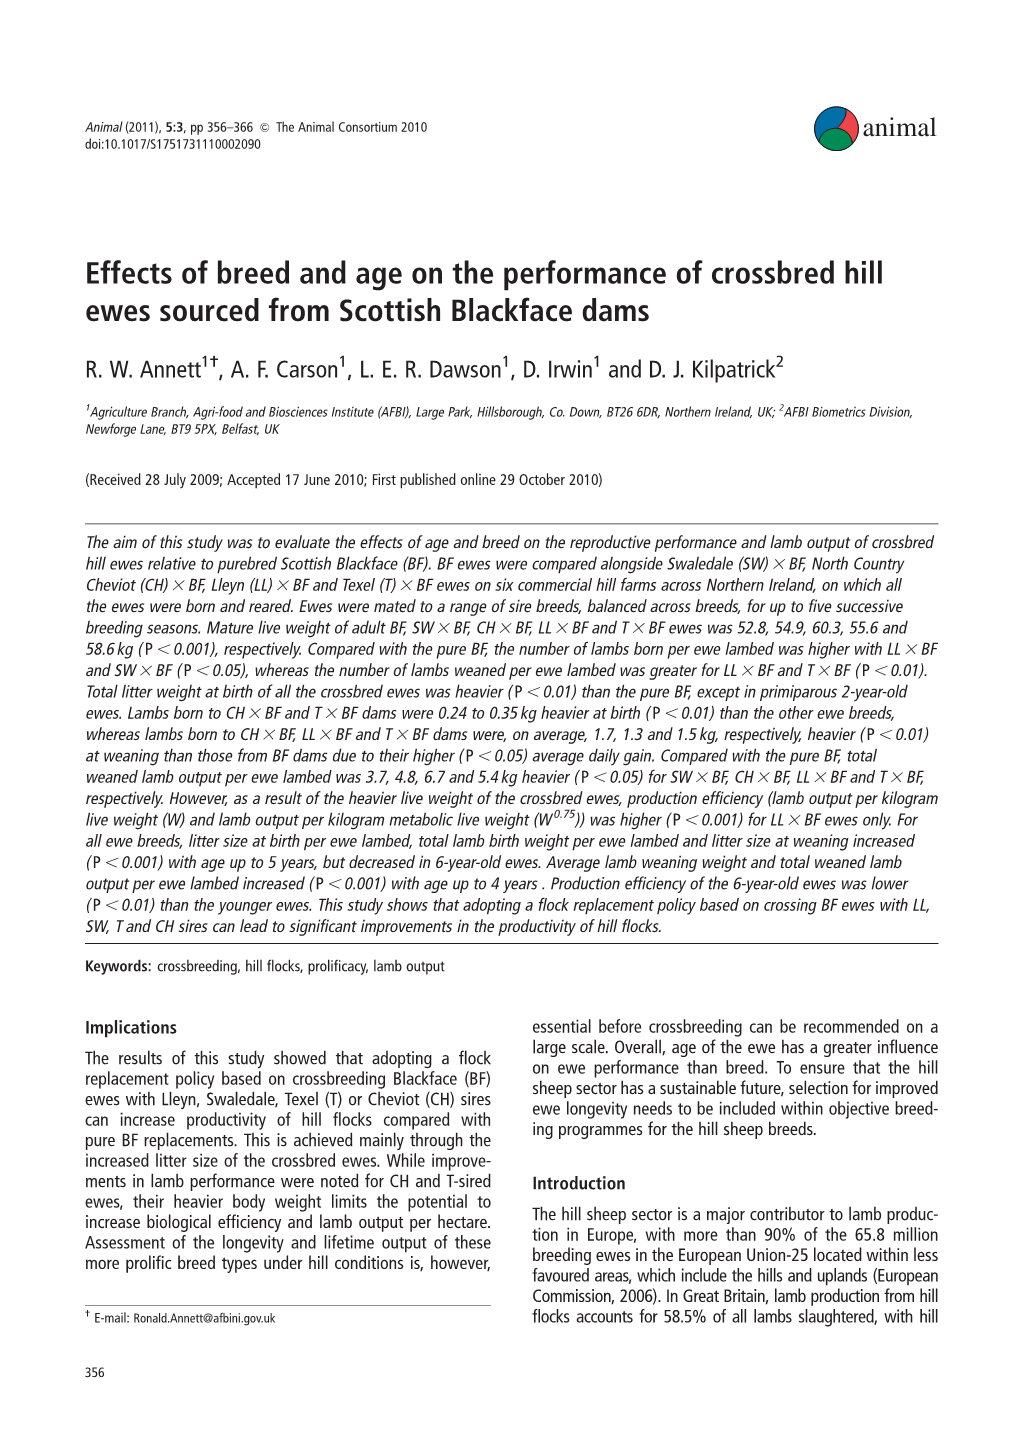 Effects of Breed and Age on the Performance of Crossbred Hill Ewes Sourced from Scottish Blackface Dams